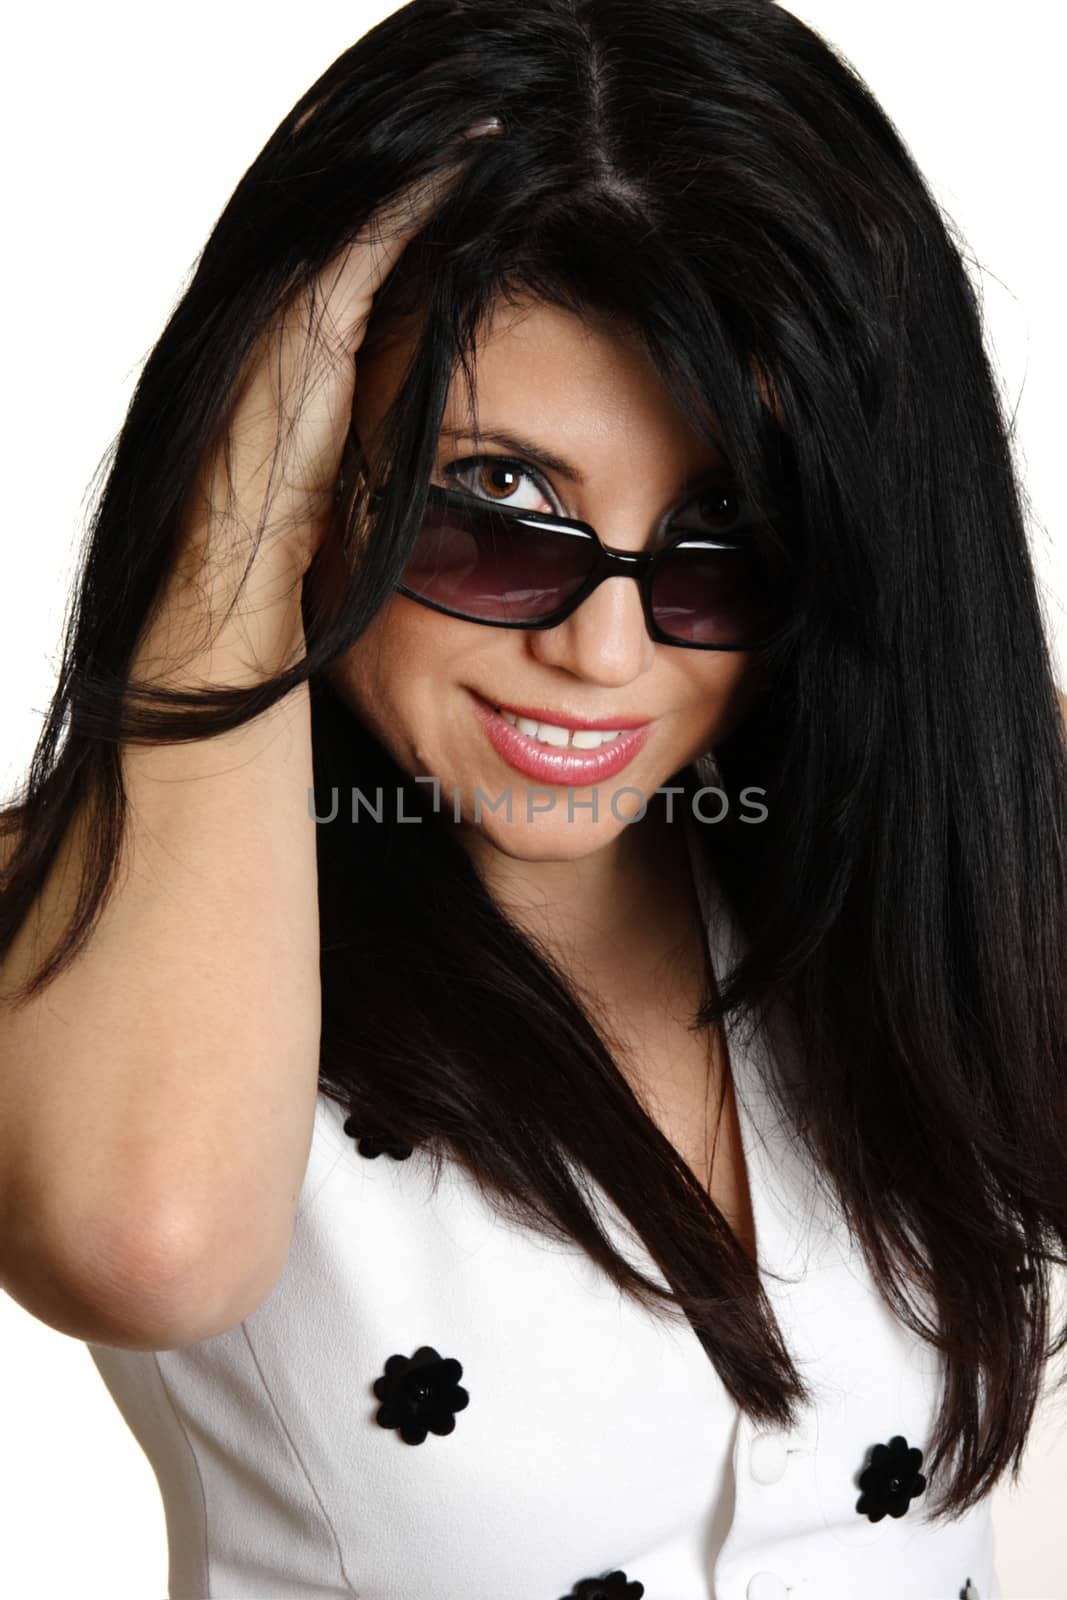 Beautiful woman smiling looking over sunglasses by lovleah